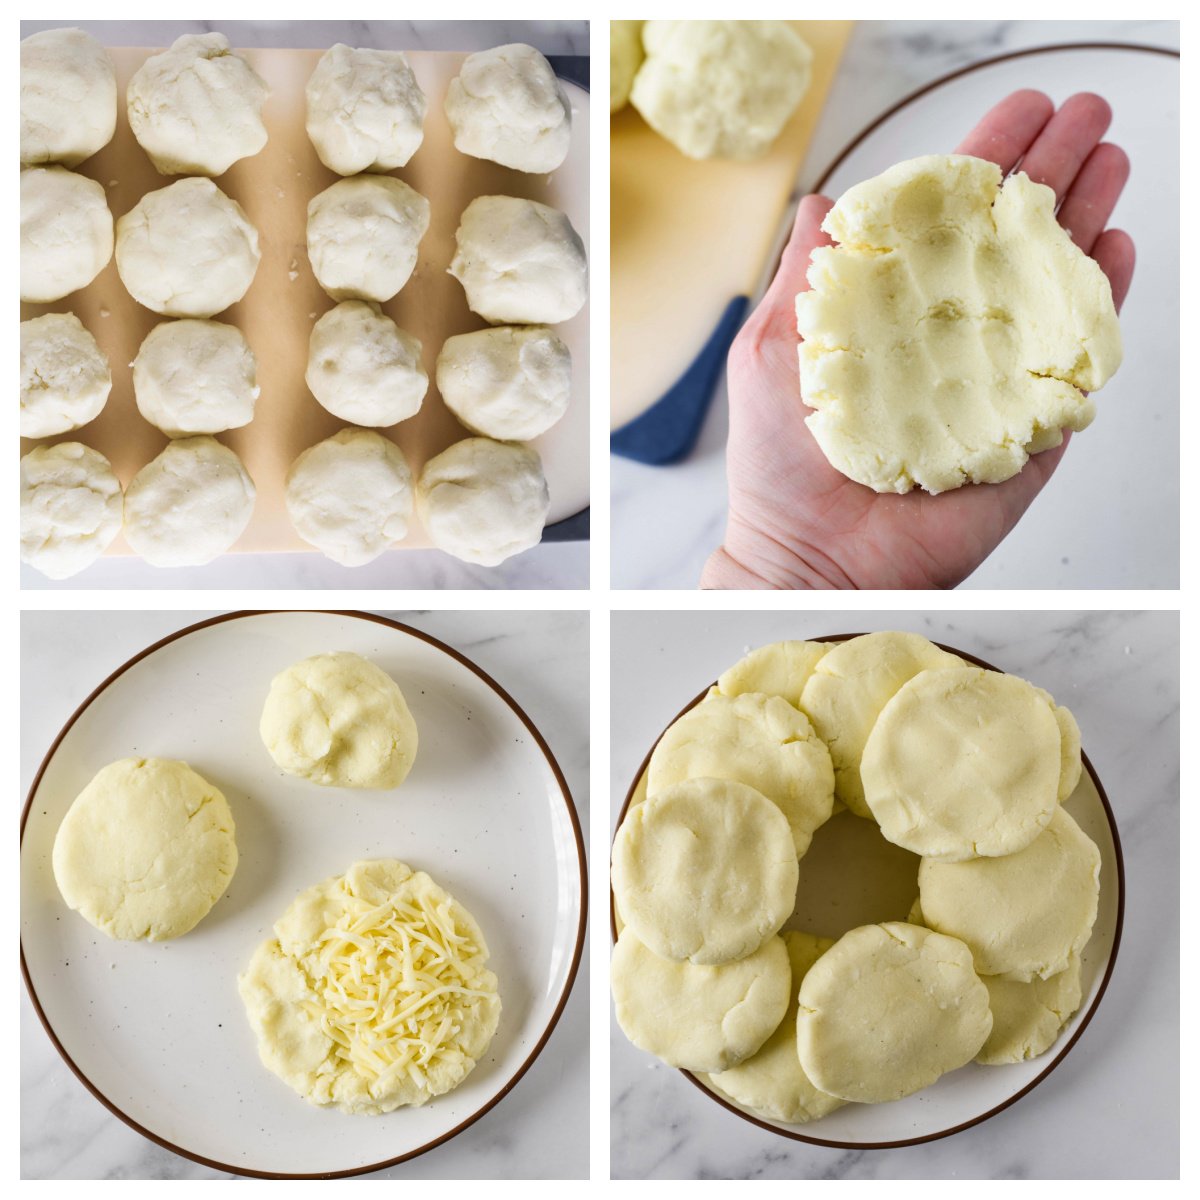 how to stuff arepas step-by-step images 